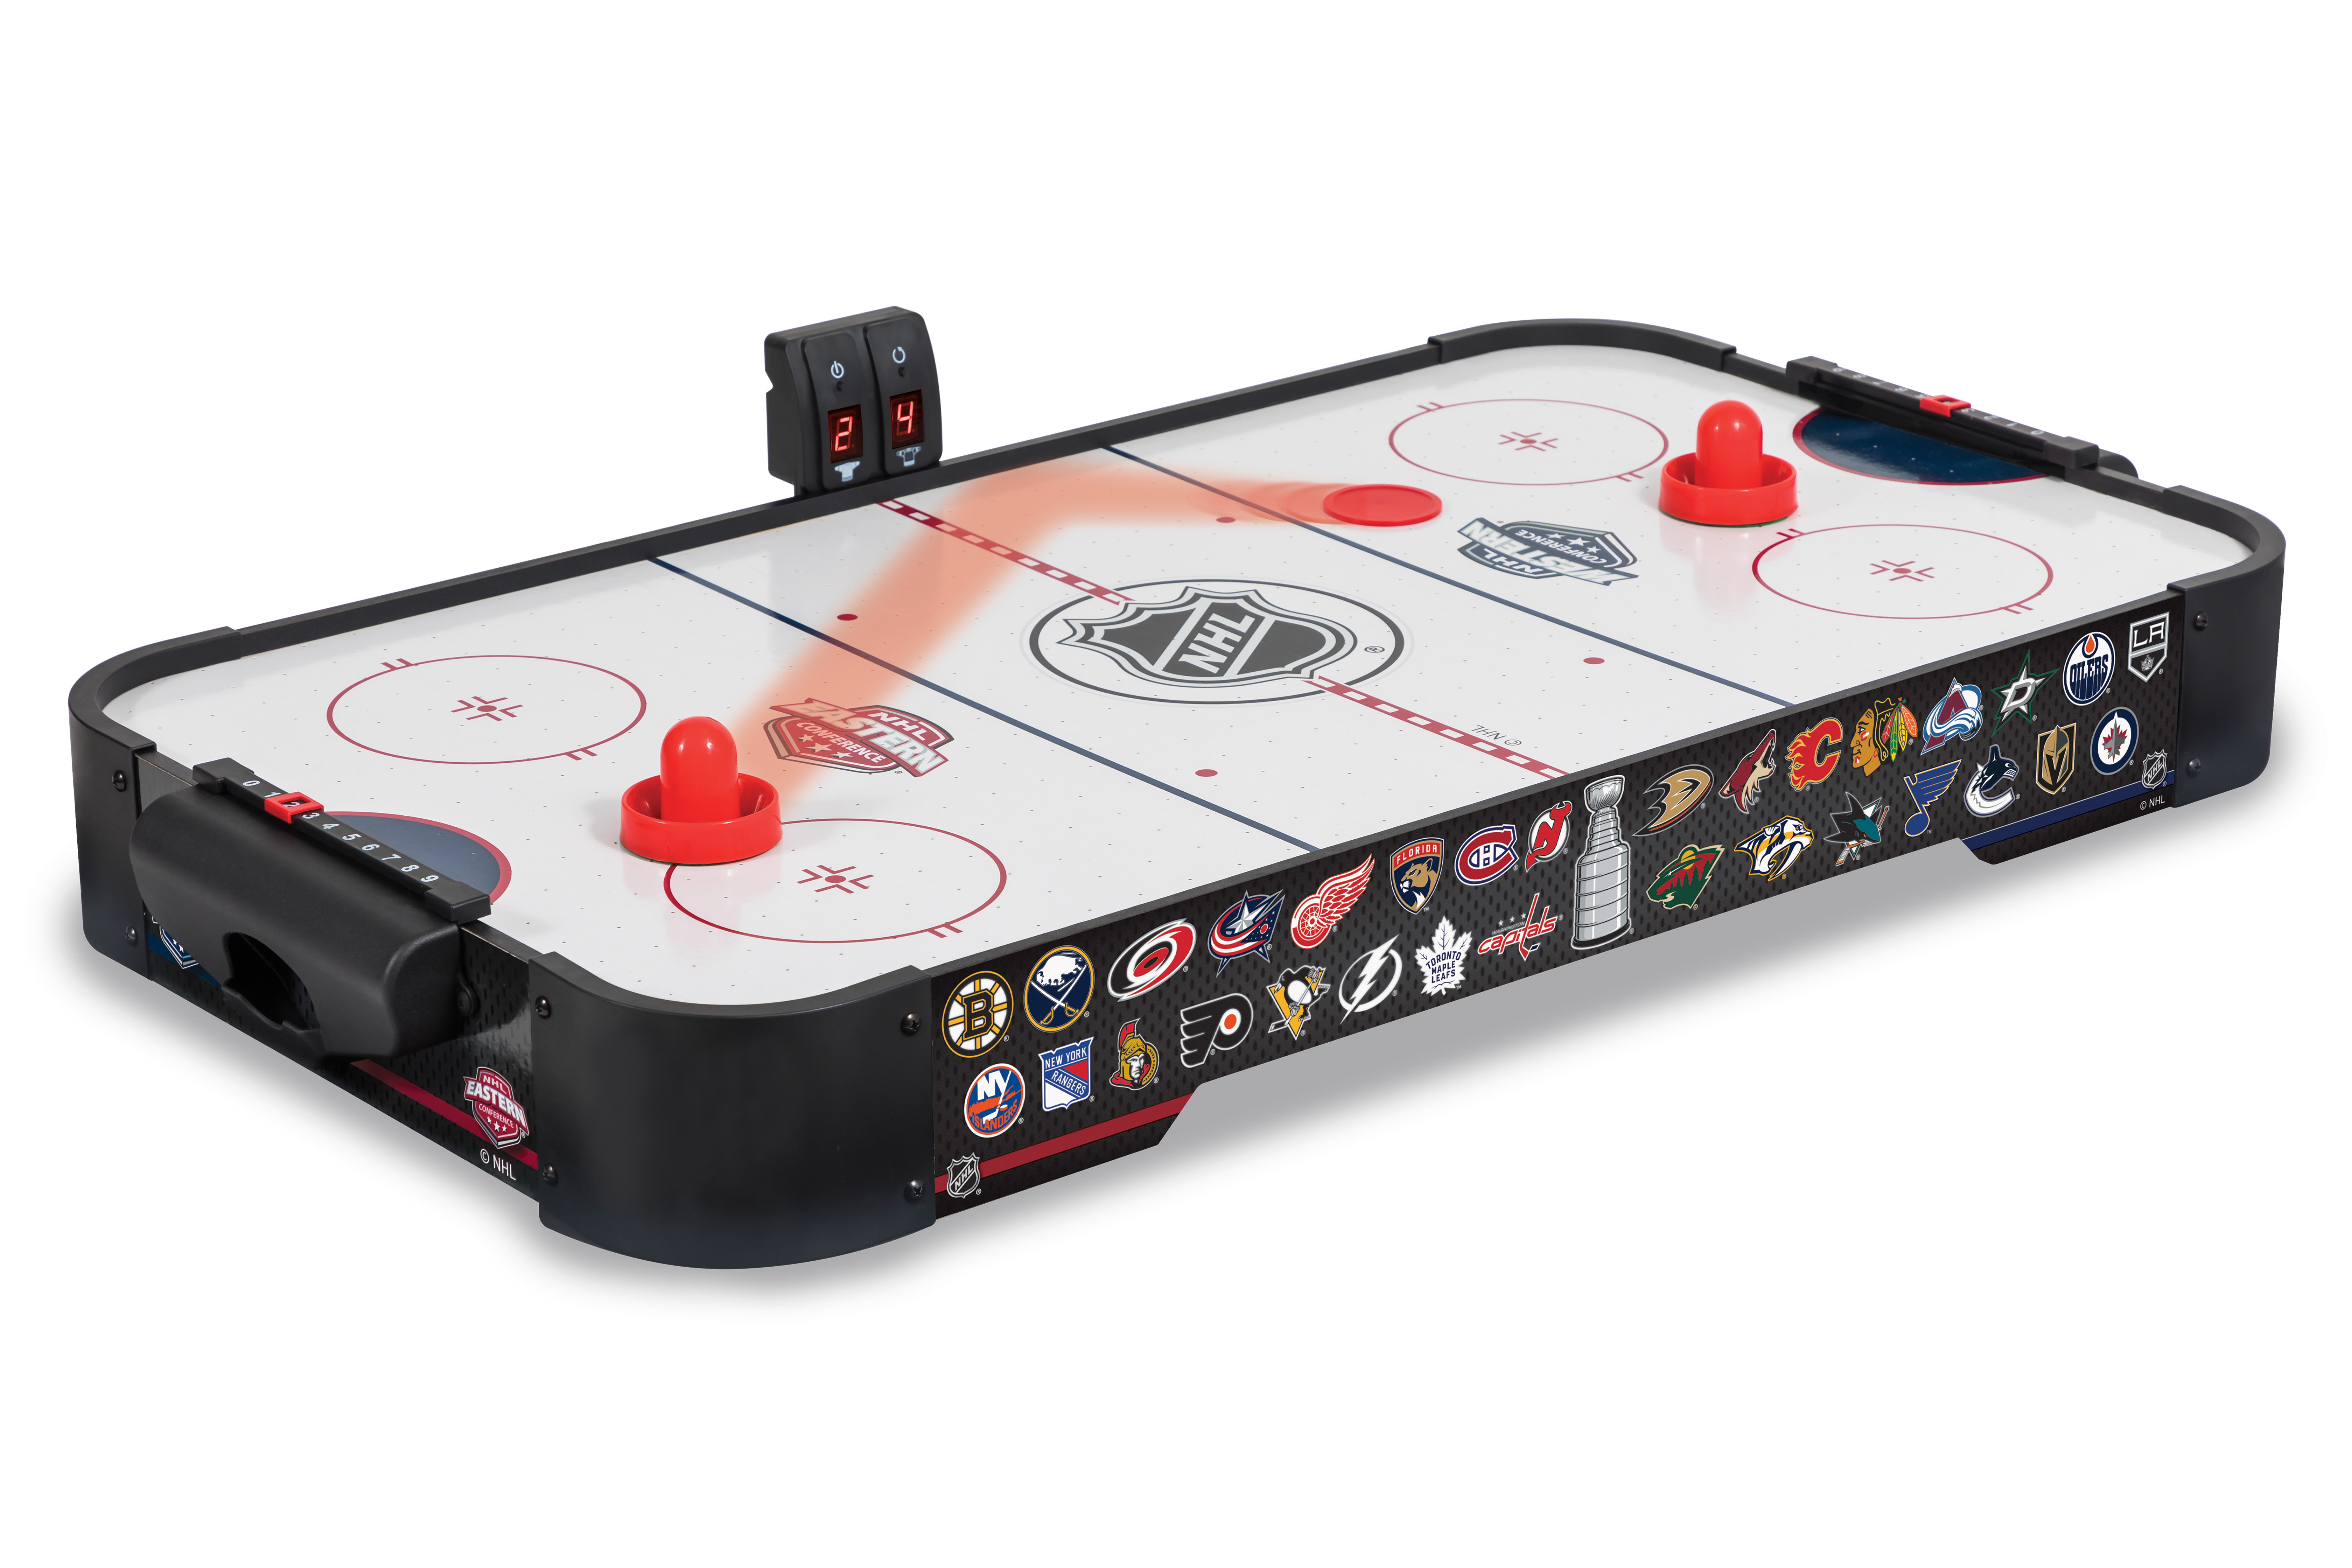 NHL Fury Table Top Air Hockey Game 36 in. with Pucks & Pushers Included - image 1 of 8